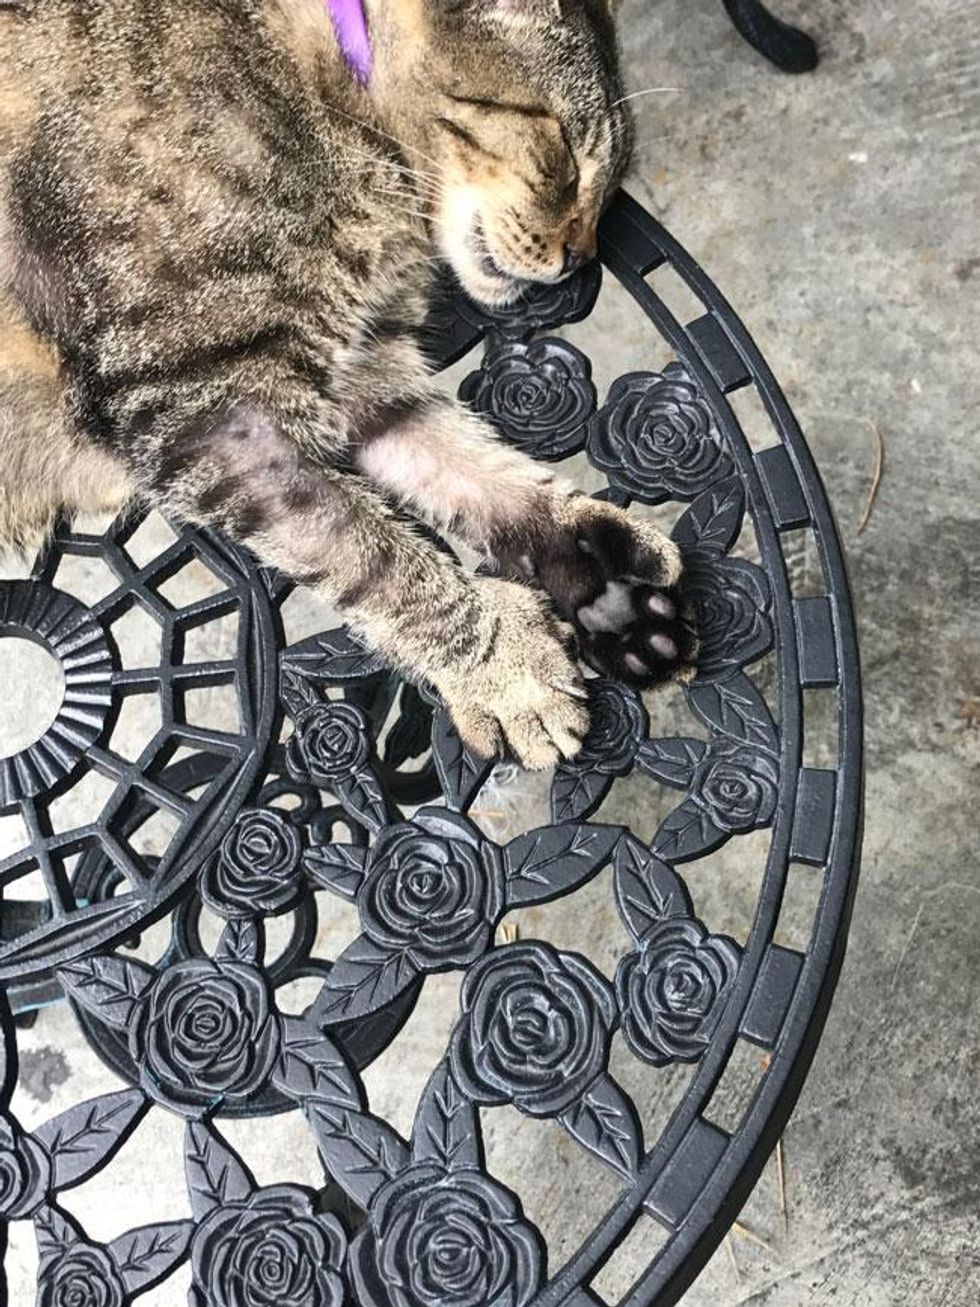 In Key West, stop by the Ernest Hemingway Home & Museum to check out his Polydactyl cats - six toes!